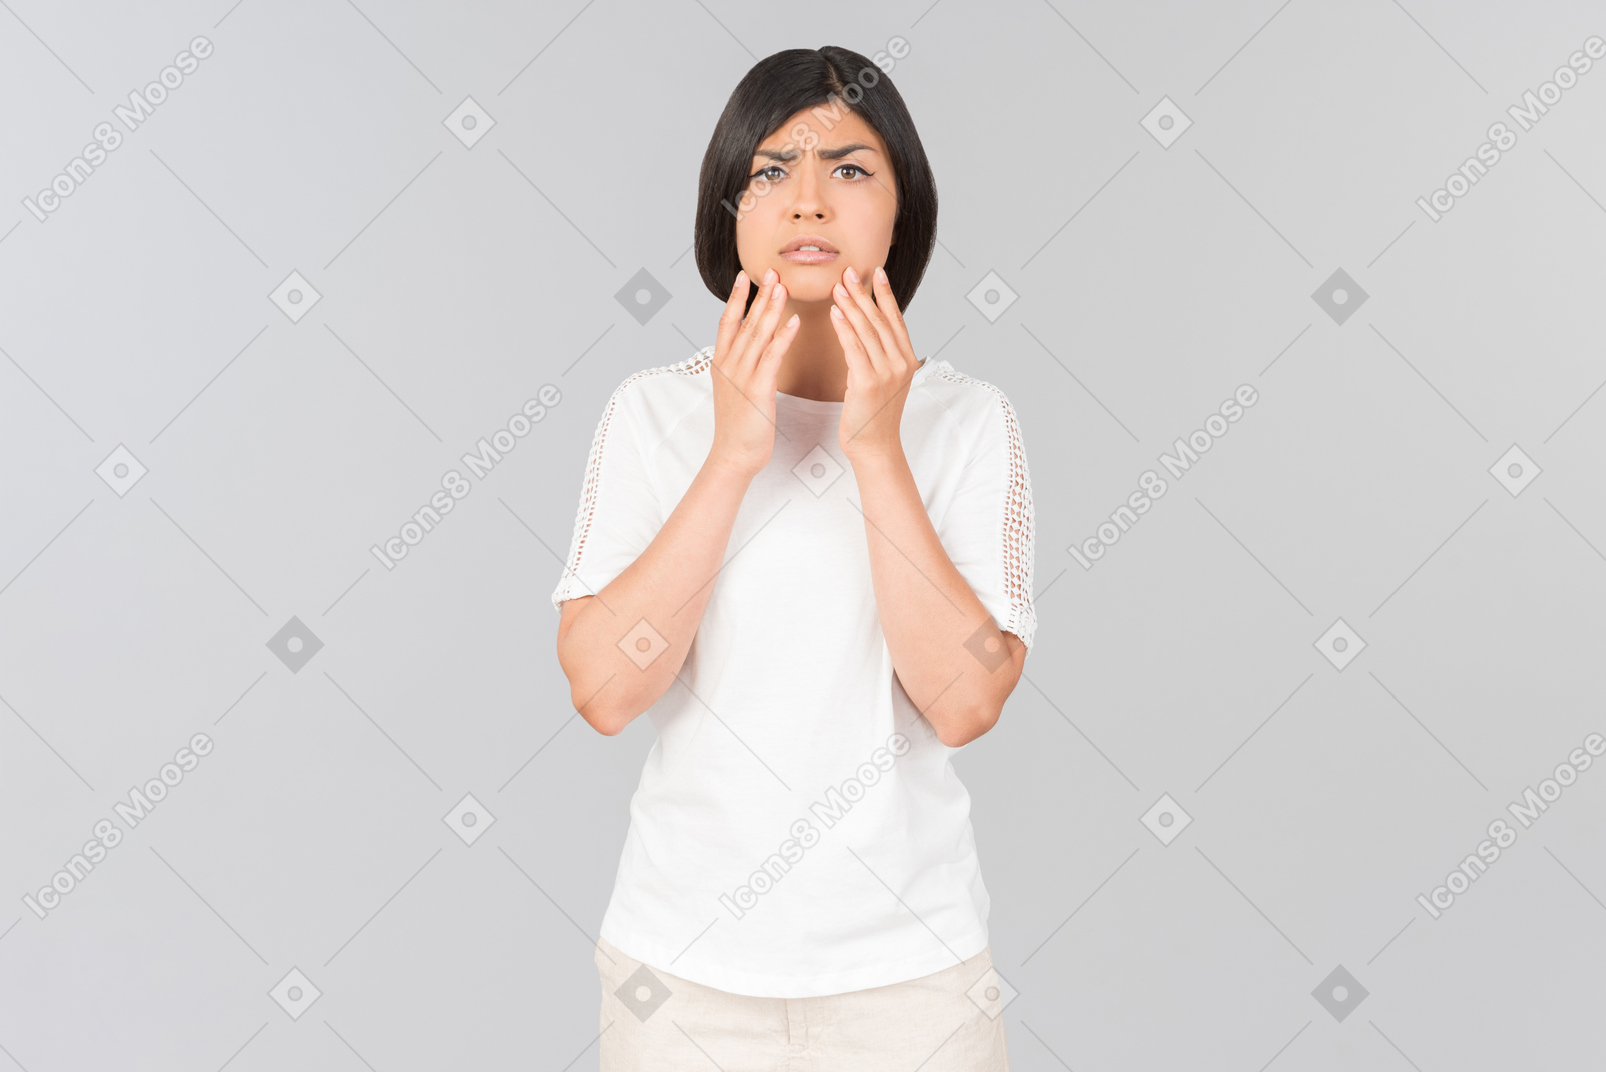 Preoccupied looking young indian woman touching her face